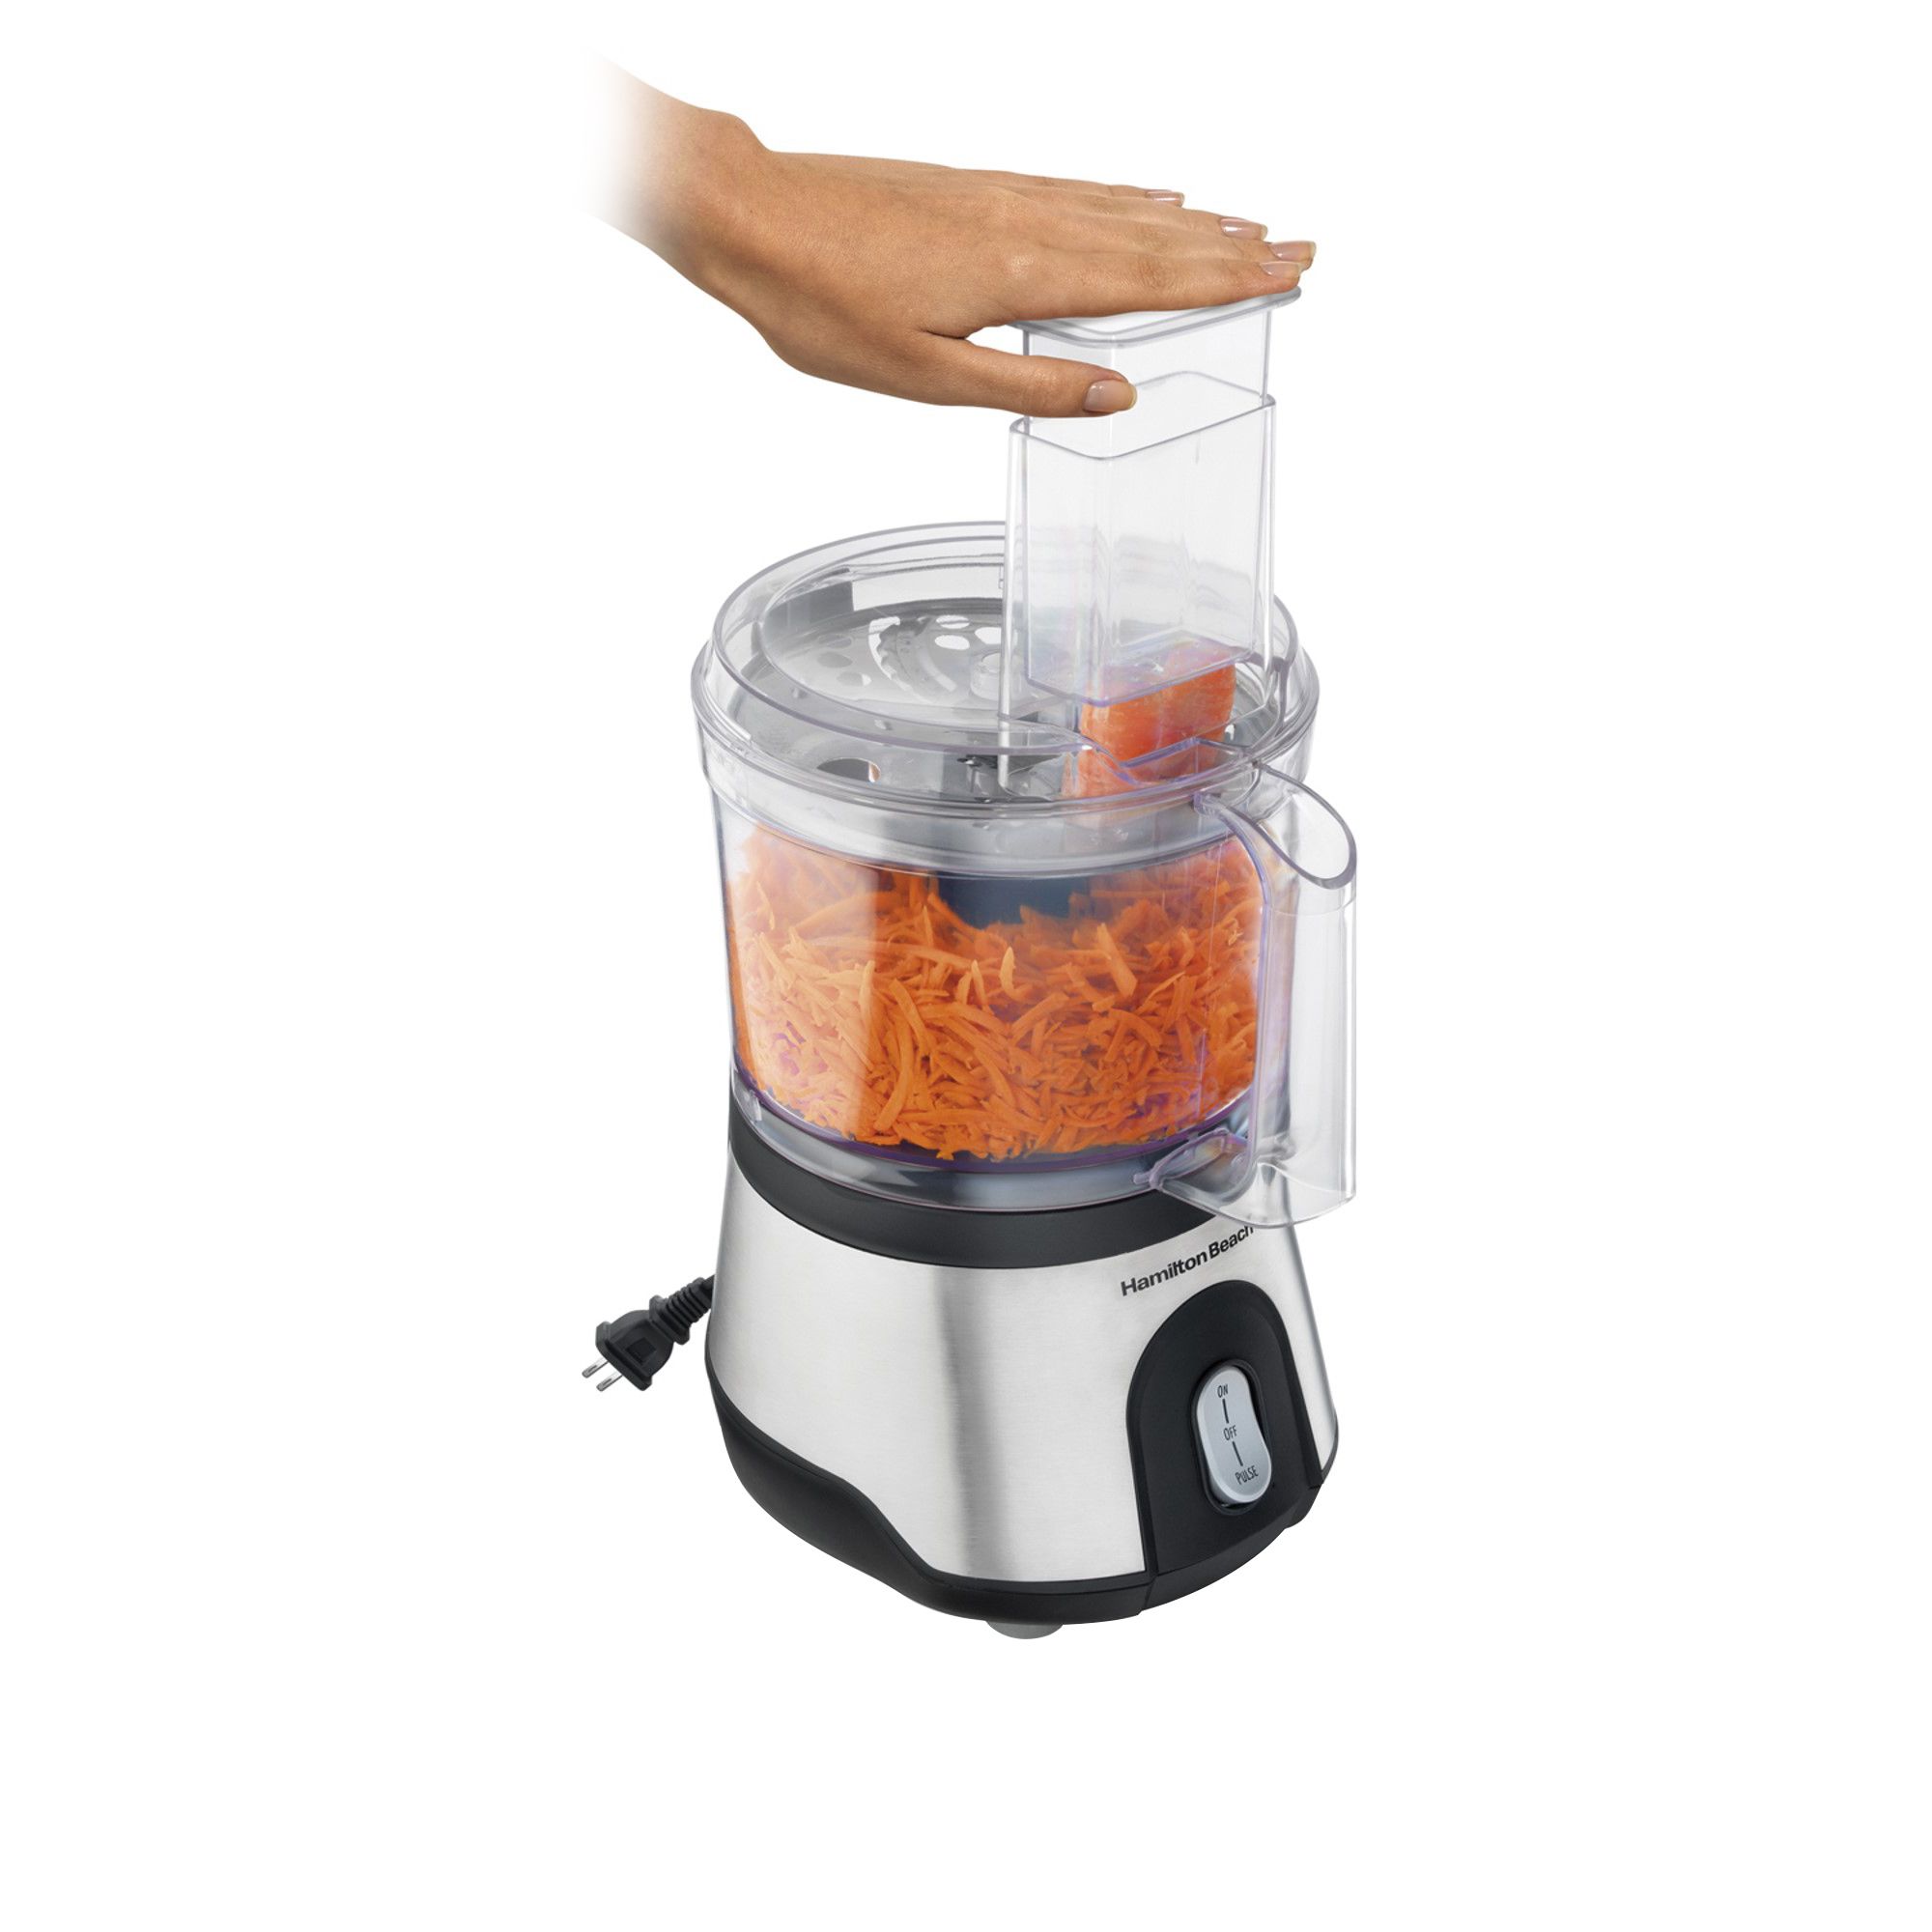 Hamilton Beach 3 Cup Stack & Press Food Chopper, 1 ct - Foods Co.